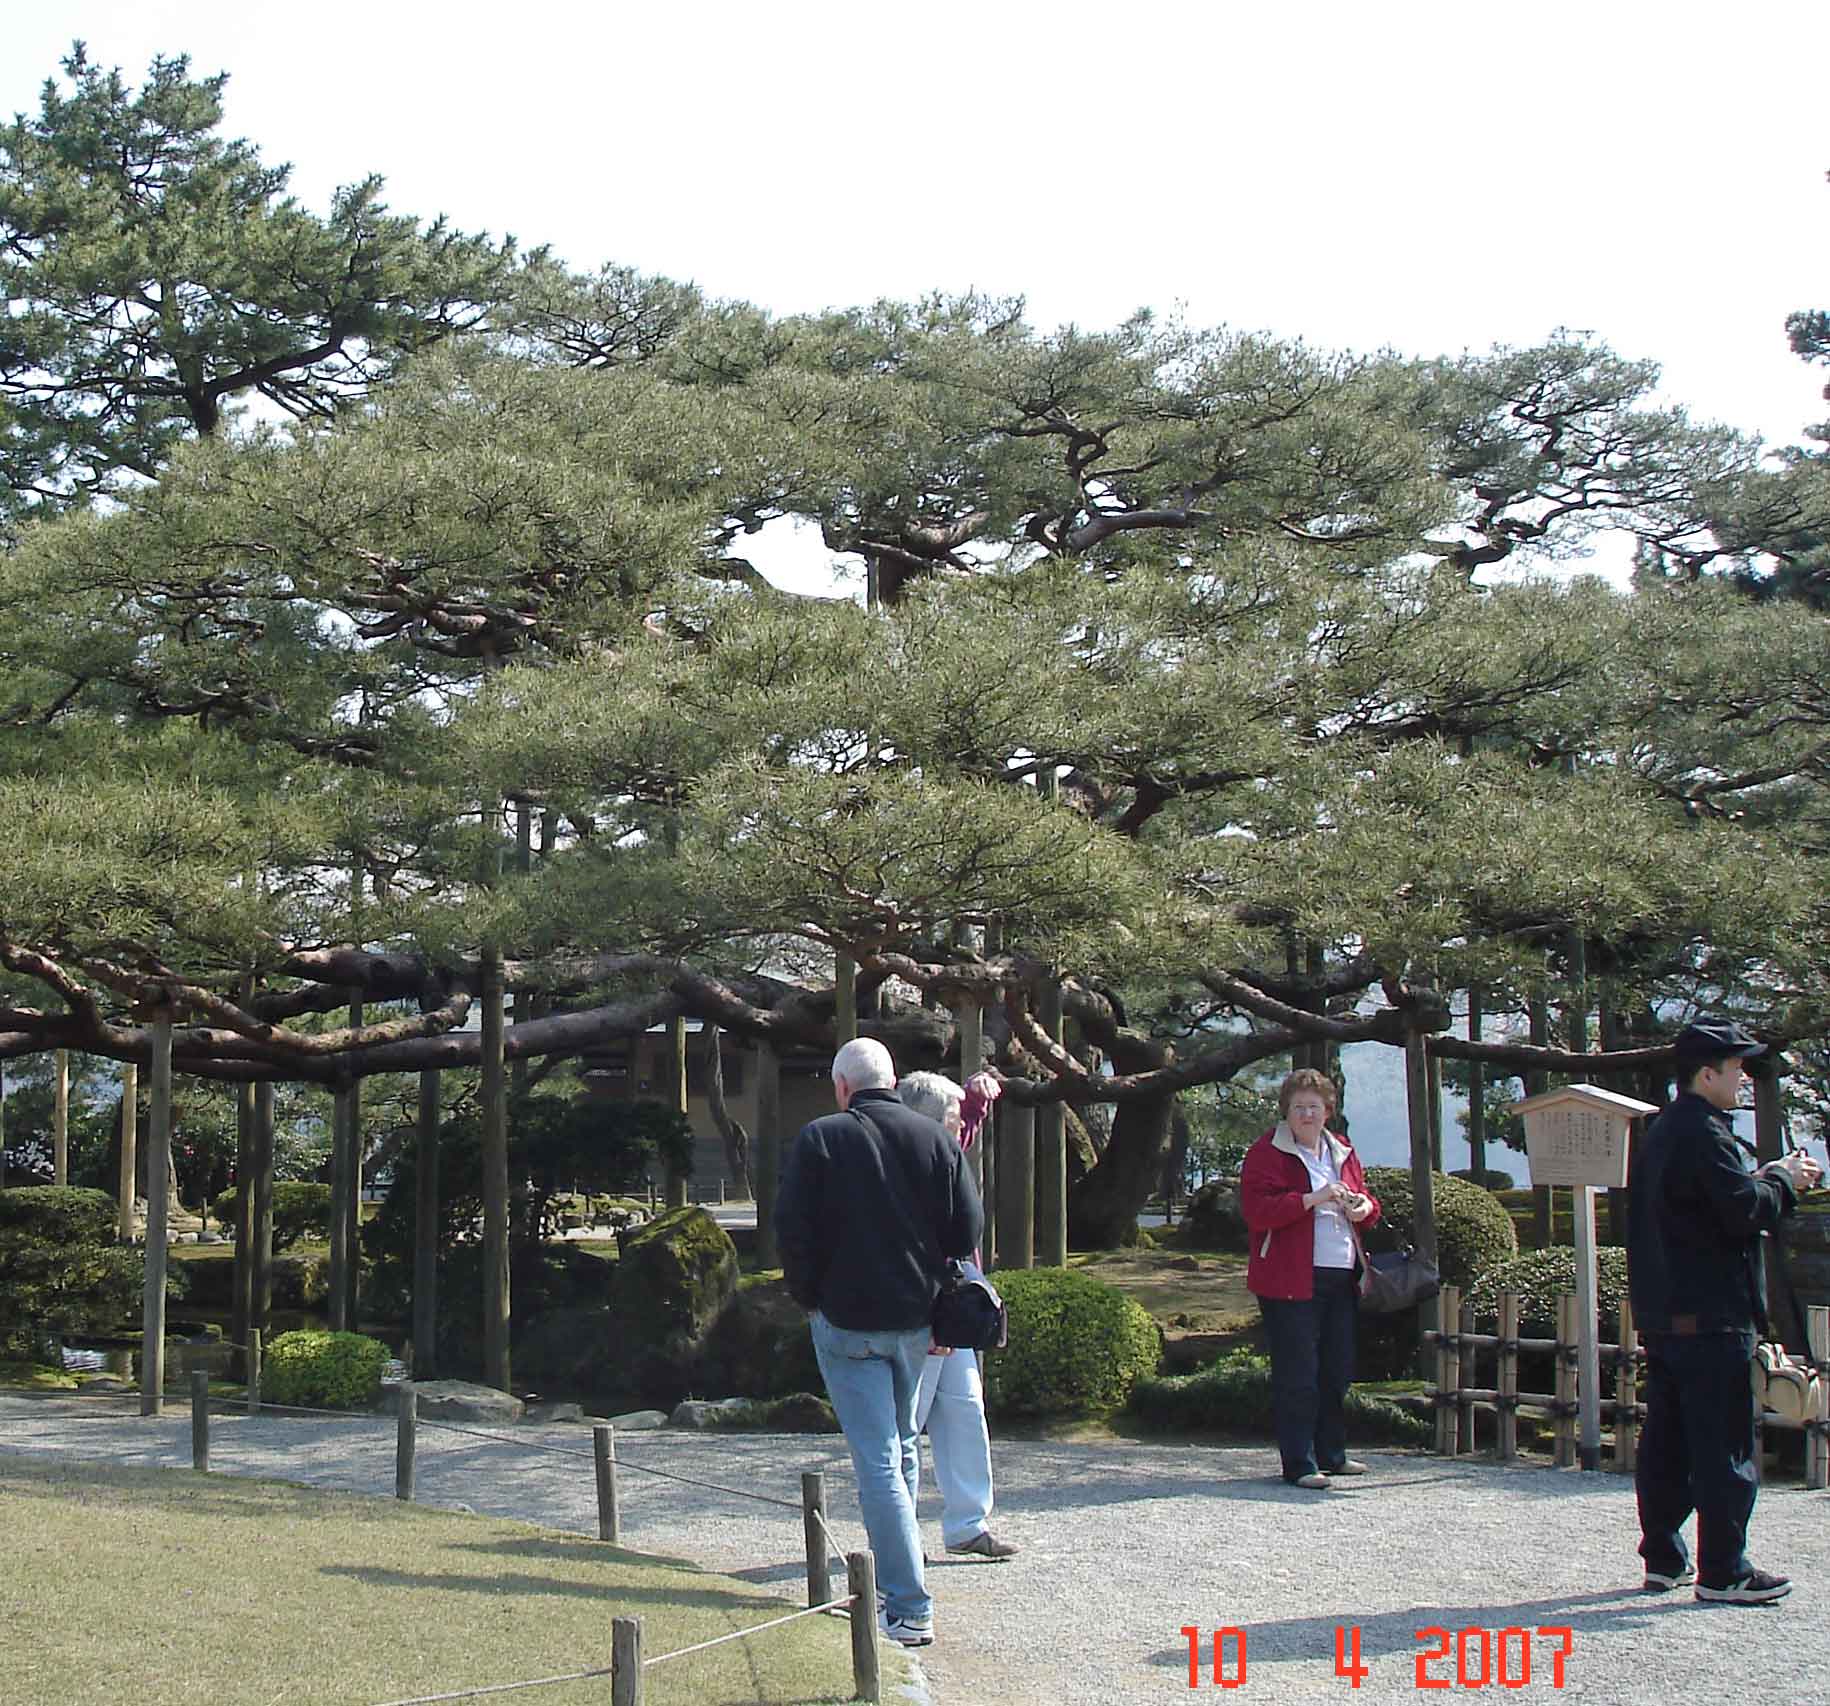 Ancient Karasaki Pine with strong poles to support branches in winter snowfall